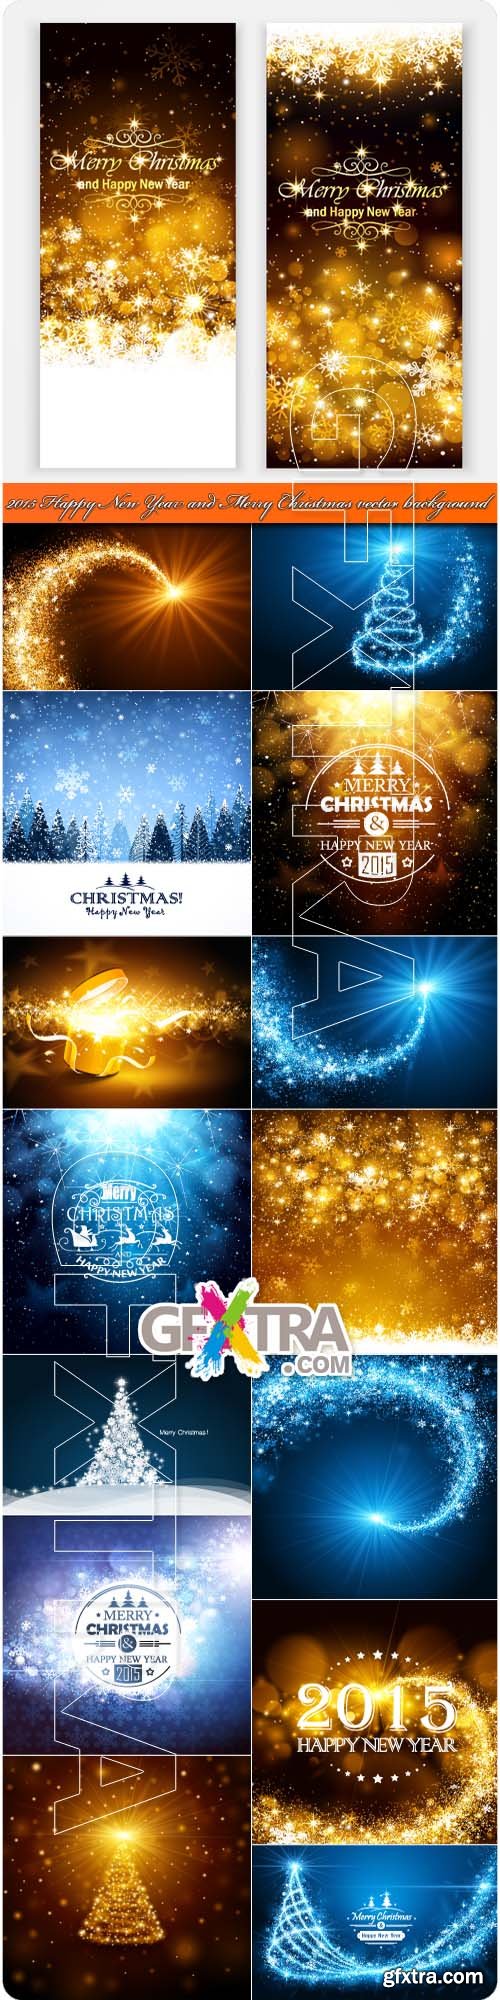 2015 Happy New Year and Merry Christmas vector background